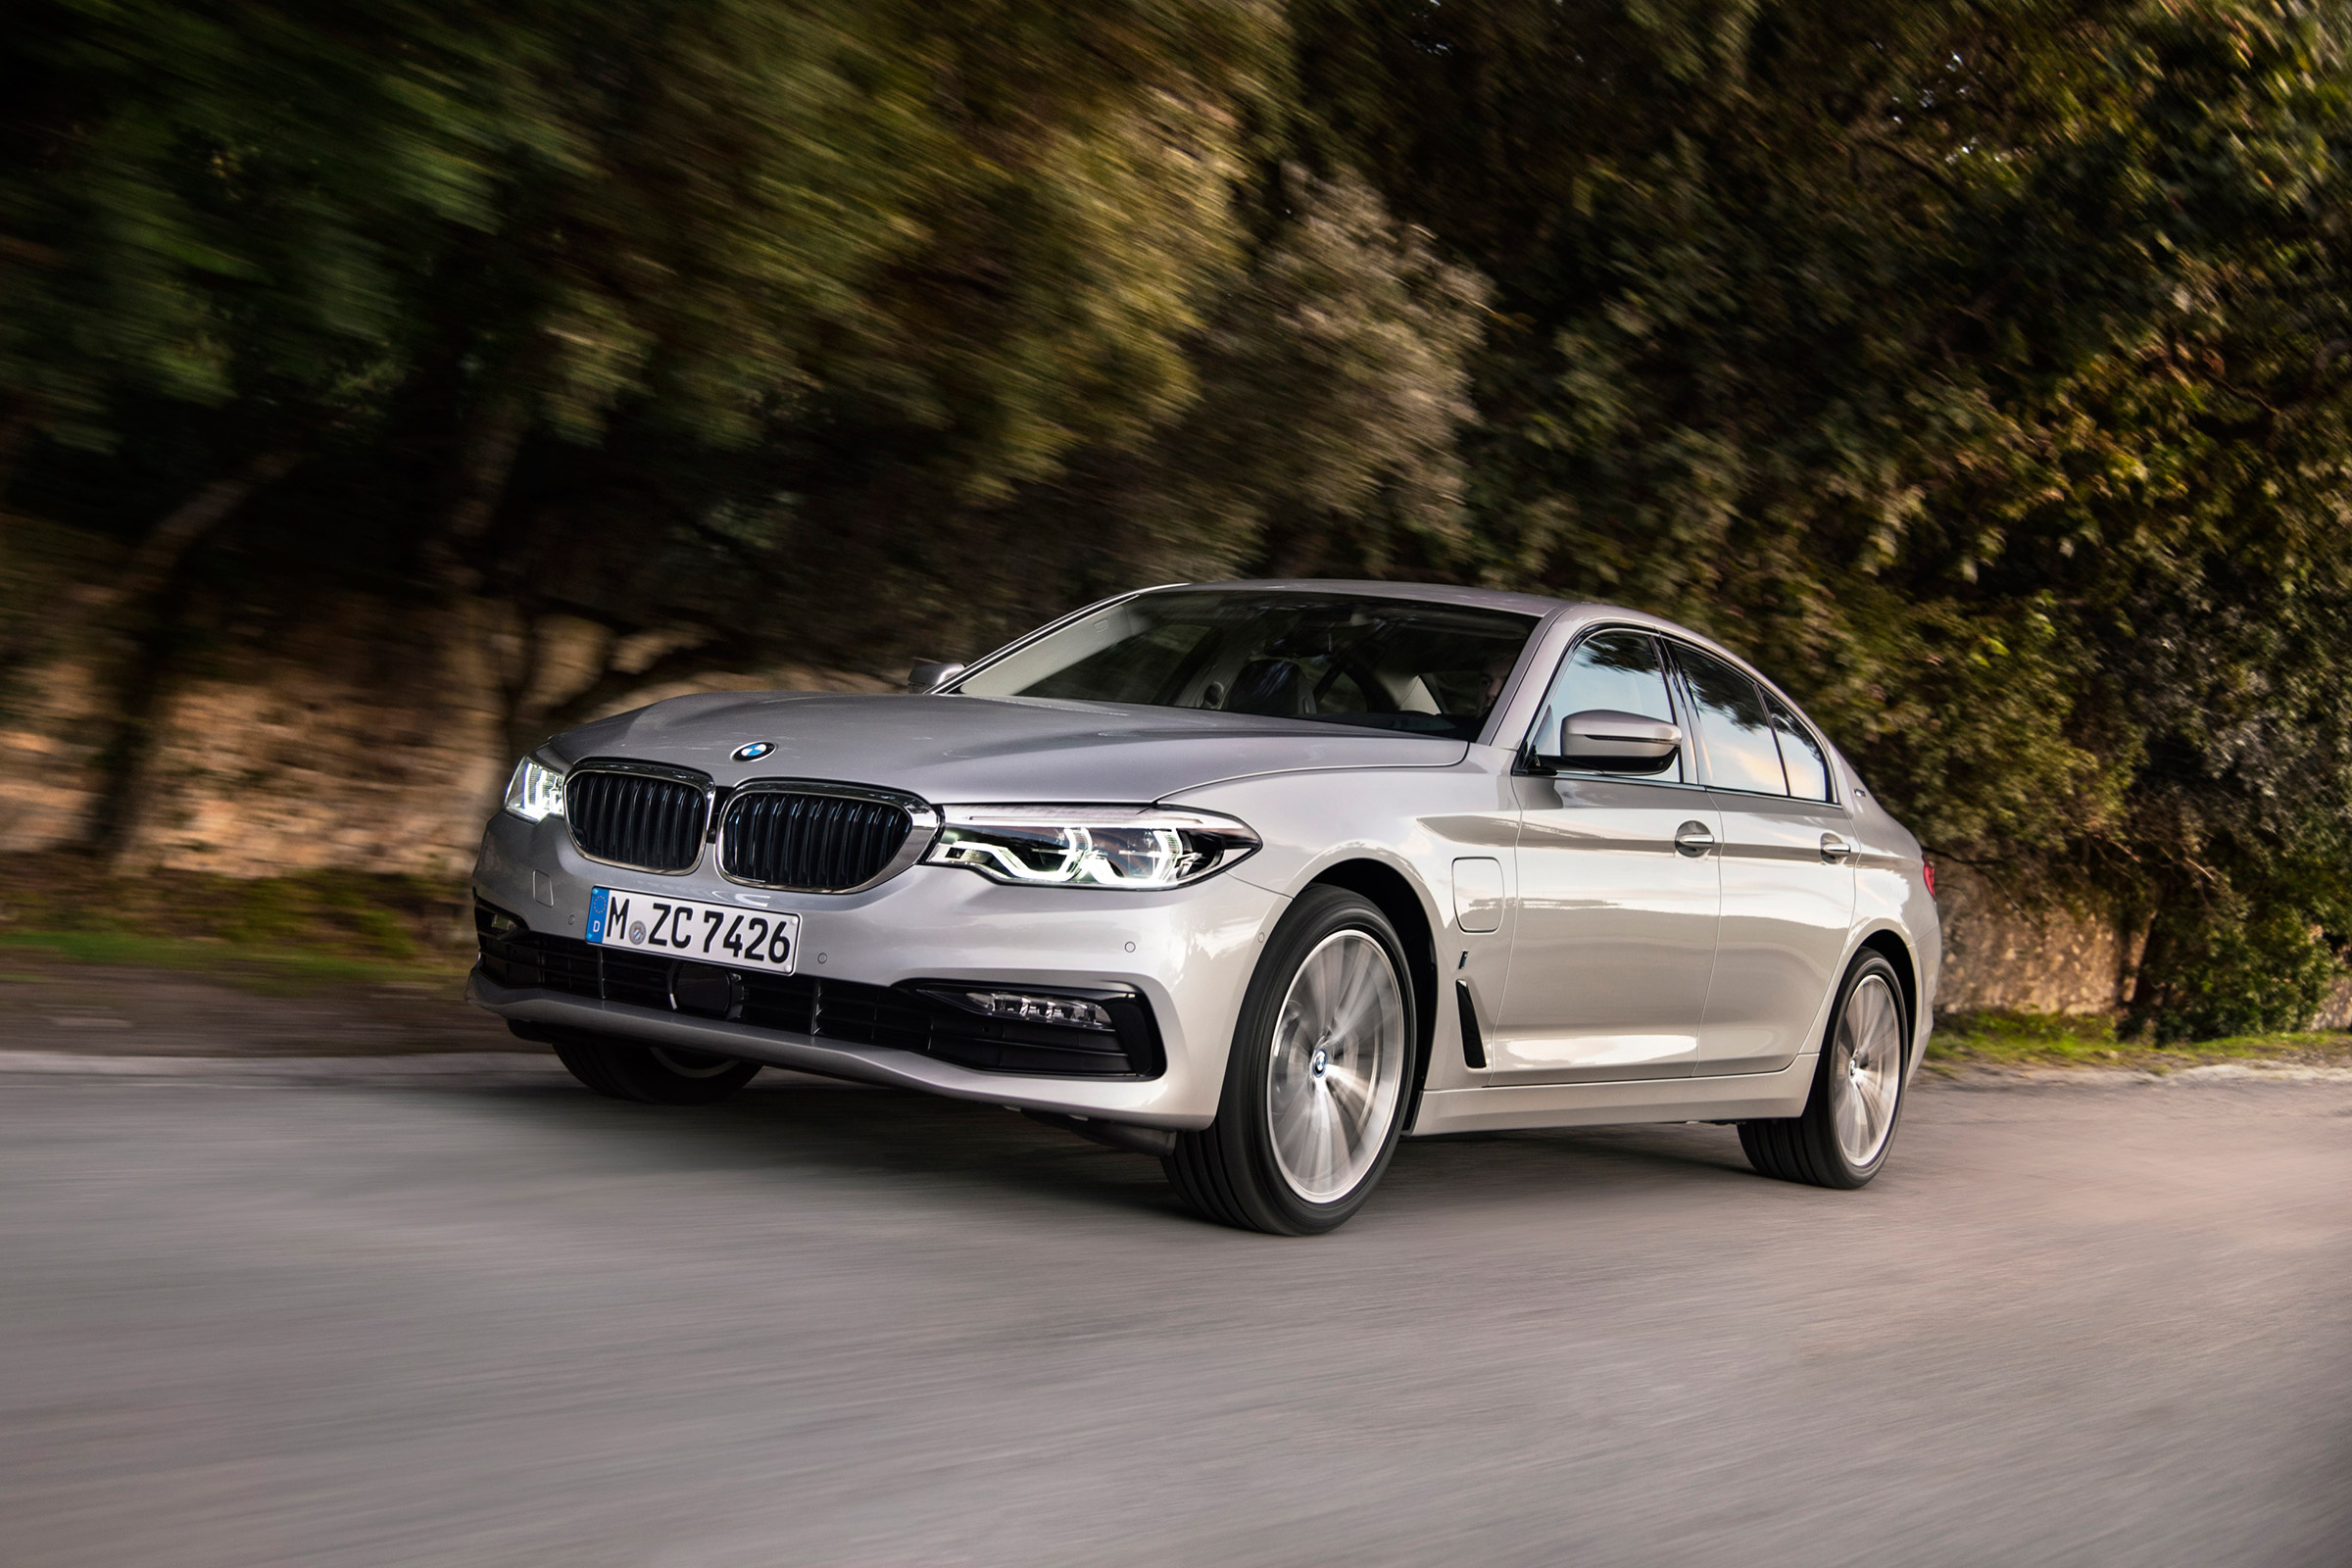 530e hybrid joins new BMW 5 Series range price and specs announced